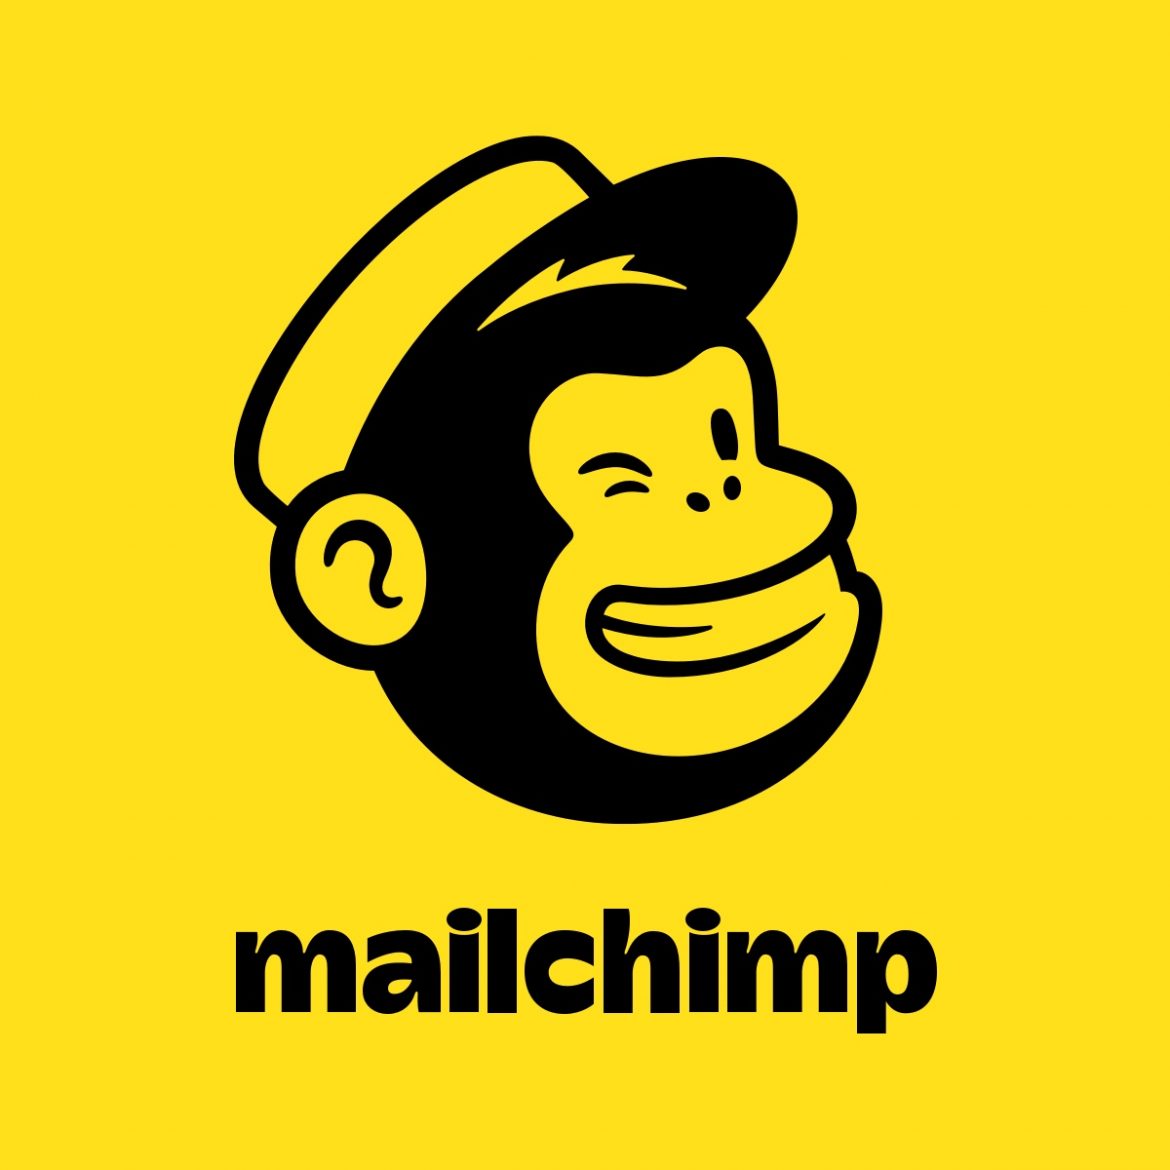 Mailchimp is latest tech company, affiliate marketer to censor The COVID Blog